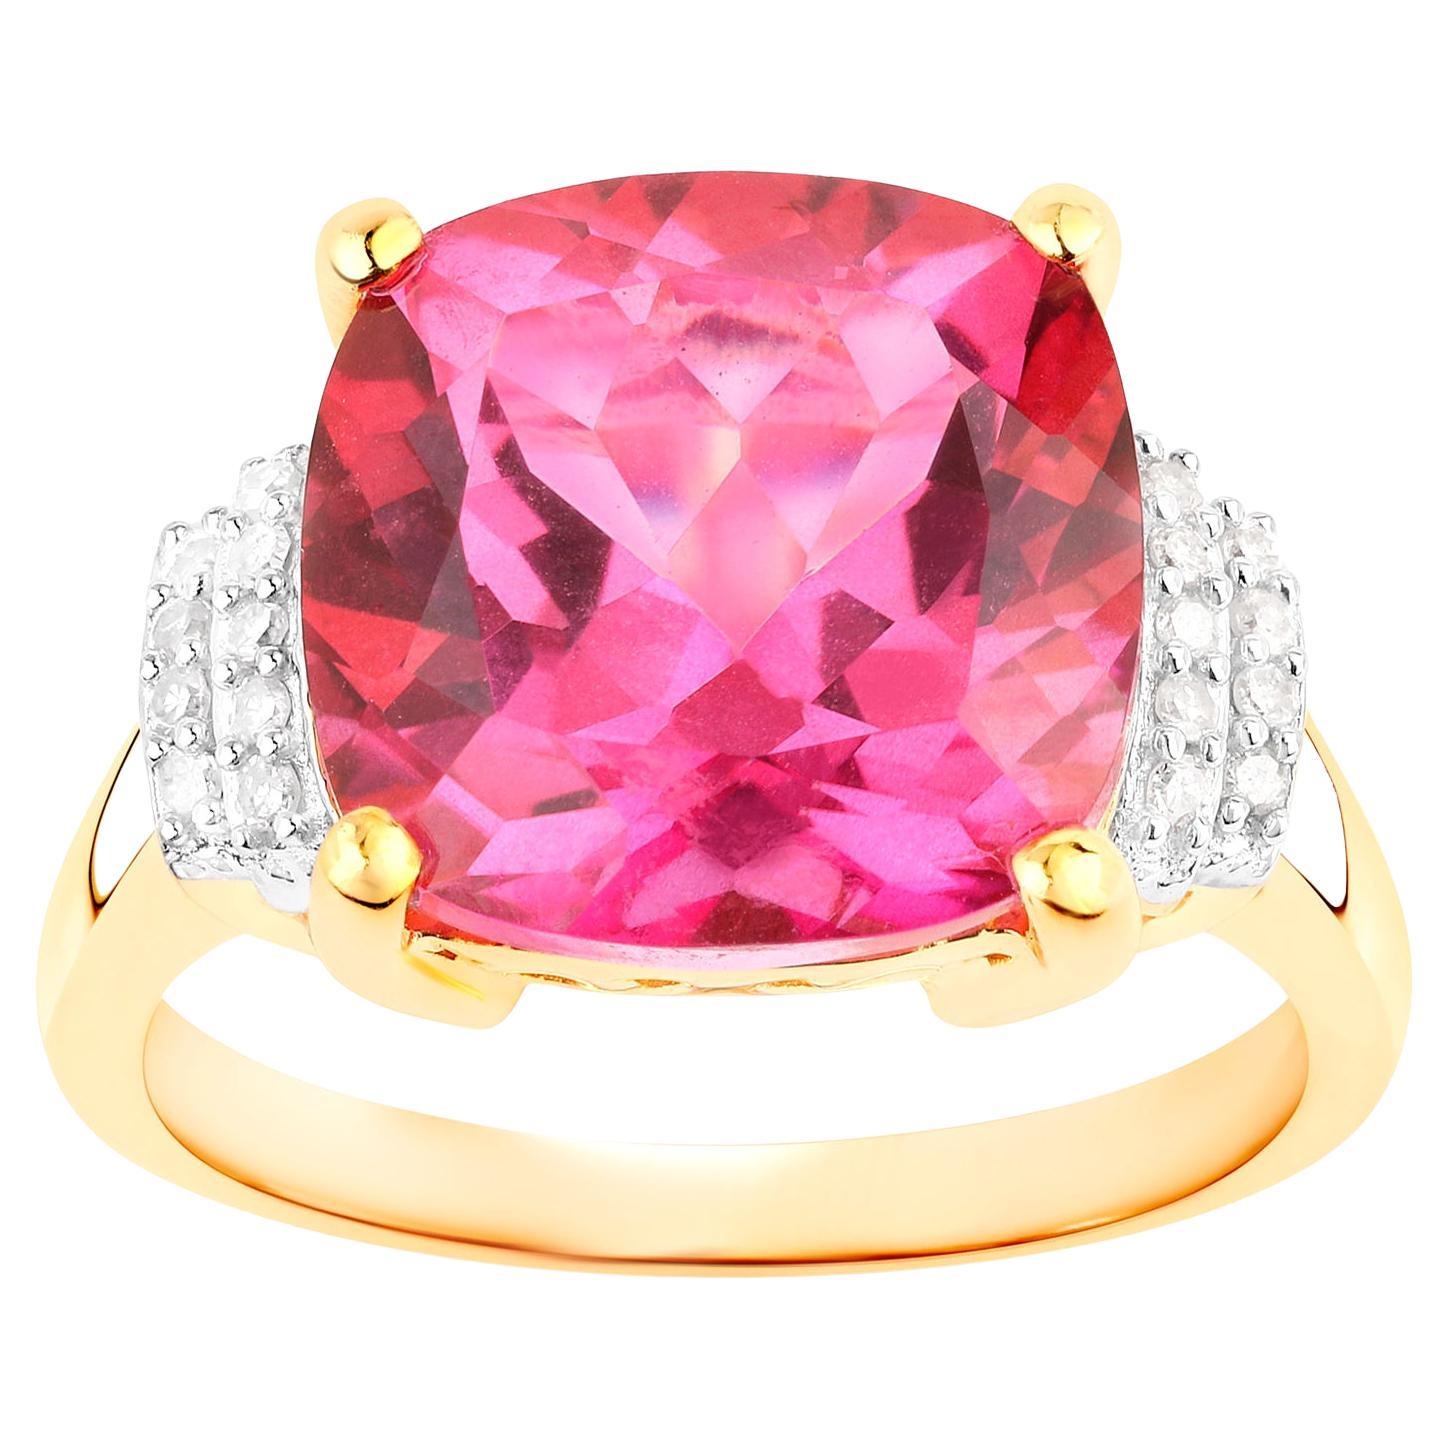 Hot Pink Topaz Ring Diamond Setting 9.25 Carats 18K Yellow Gold Plated For Sale